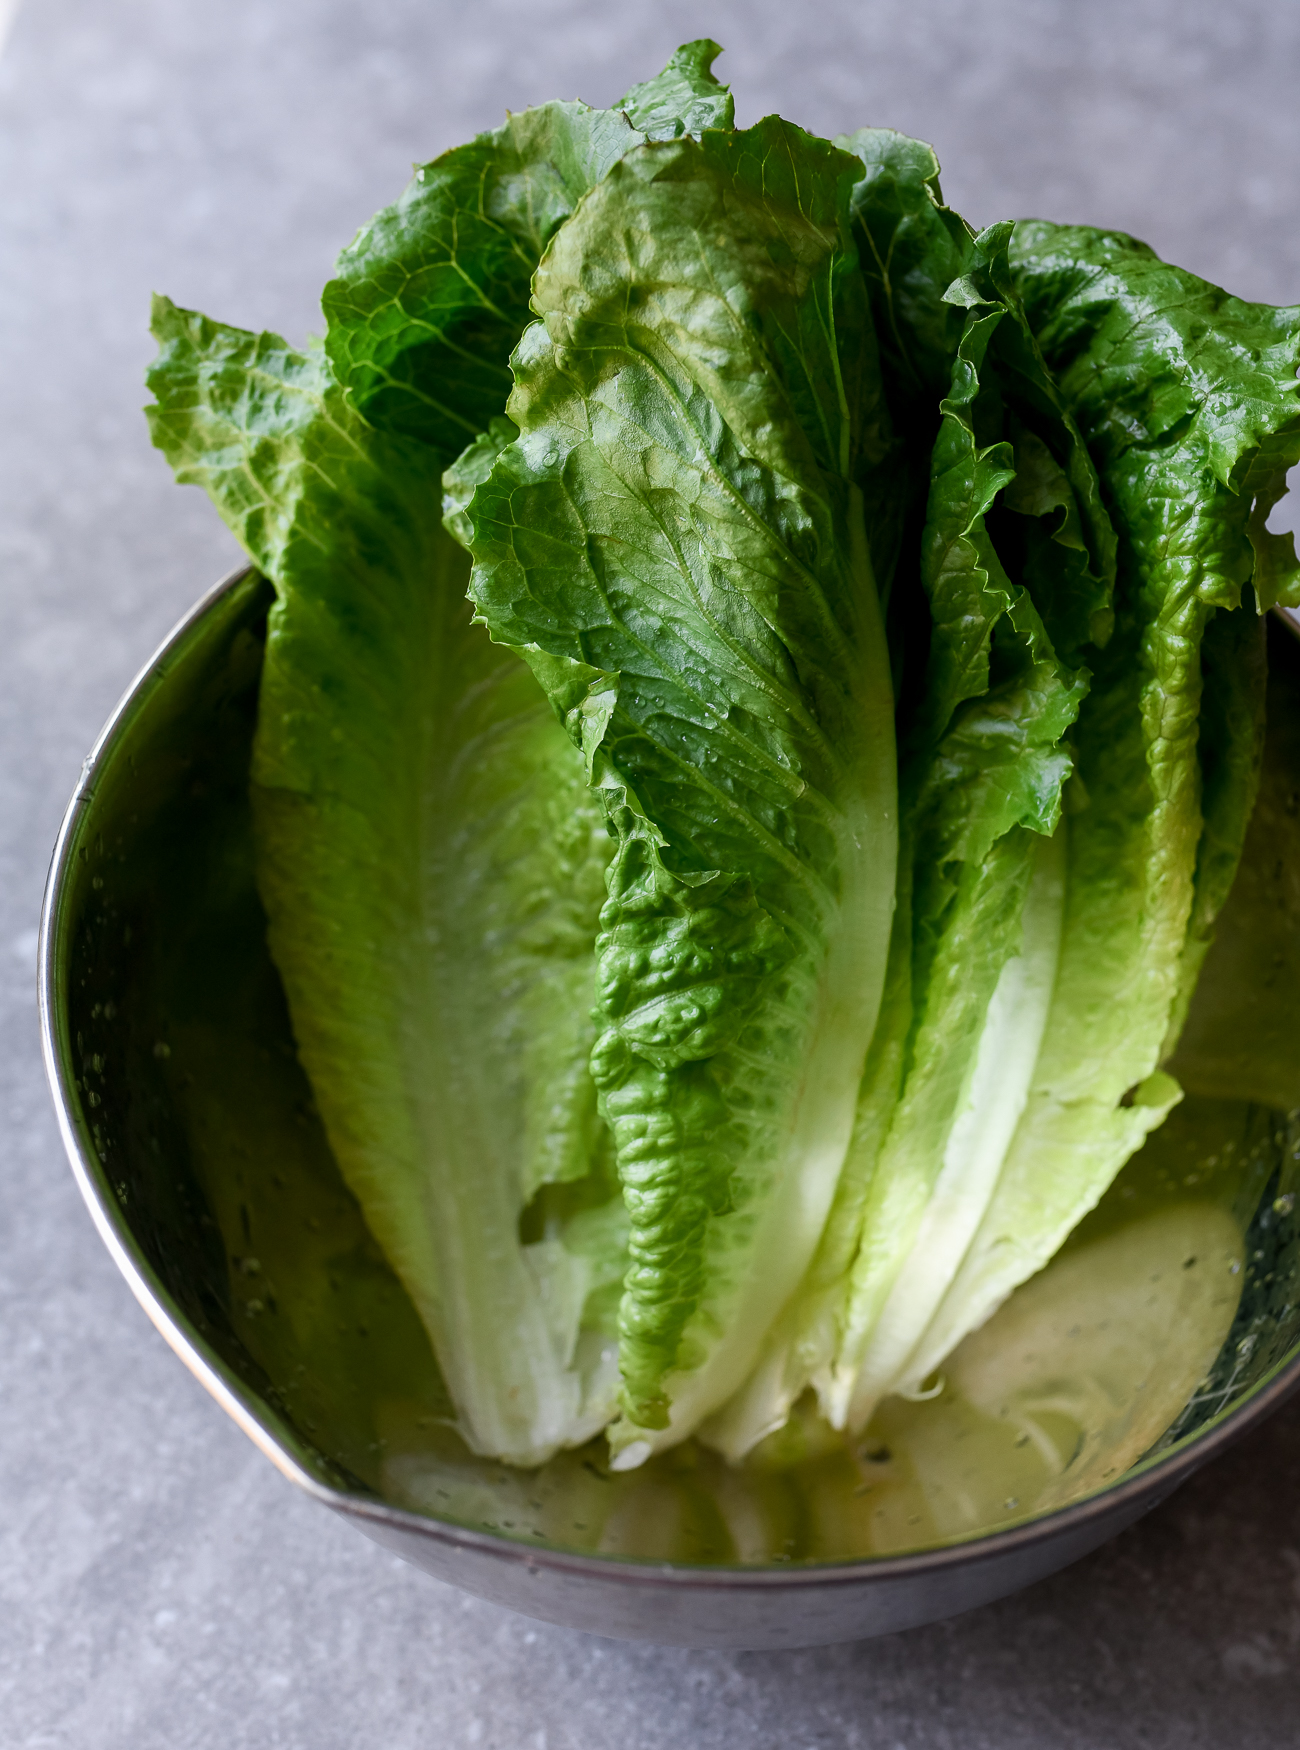 Washed romaine lettuce leaves in metal bowl